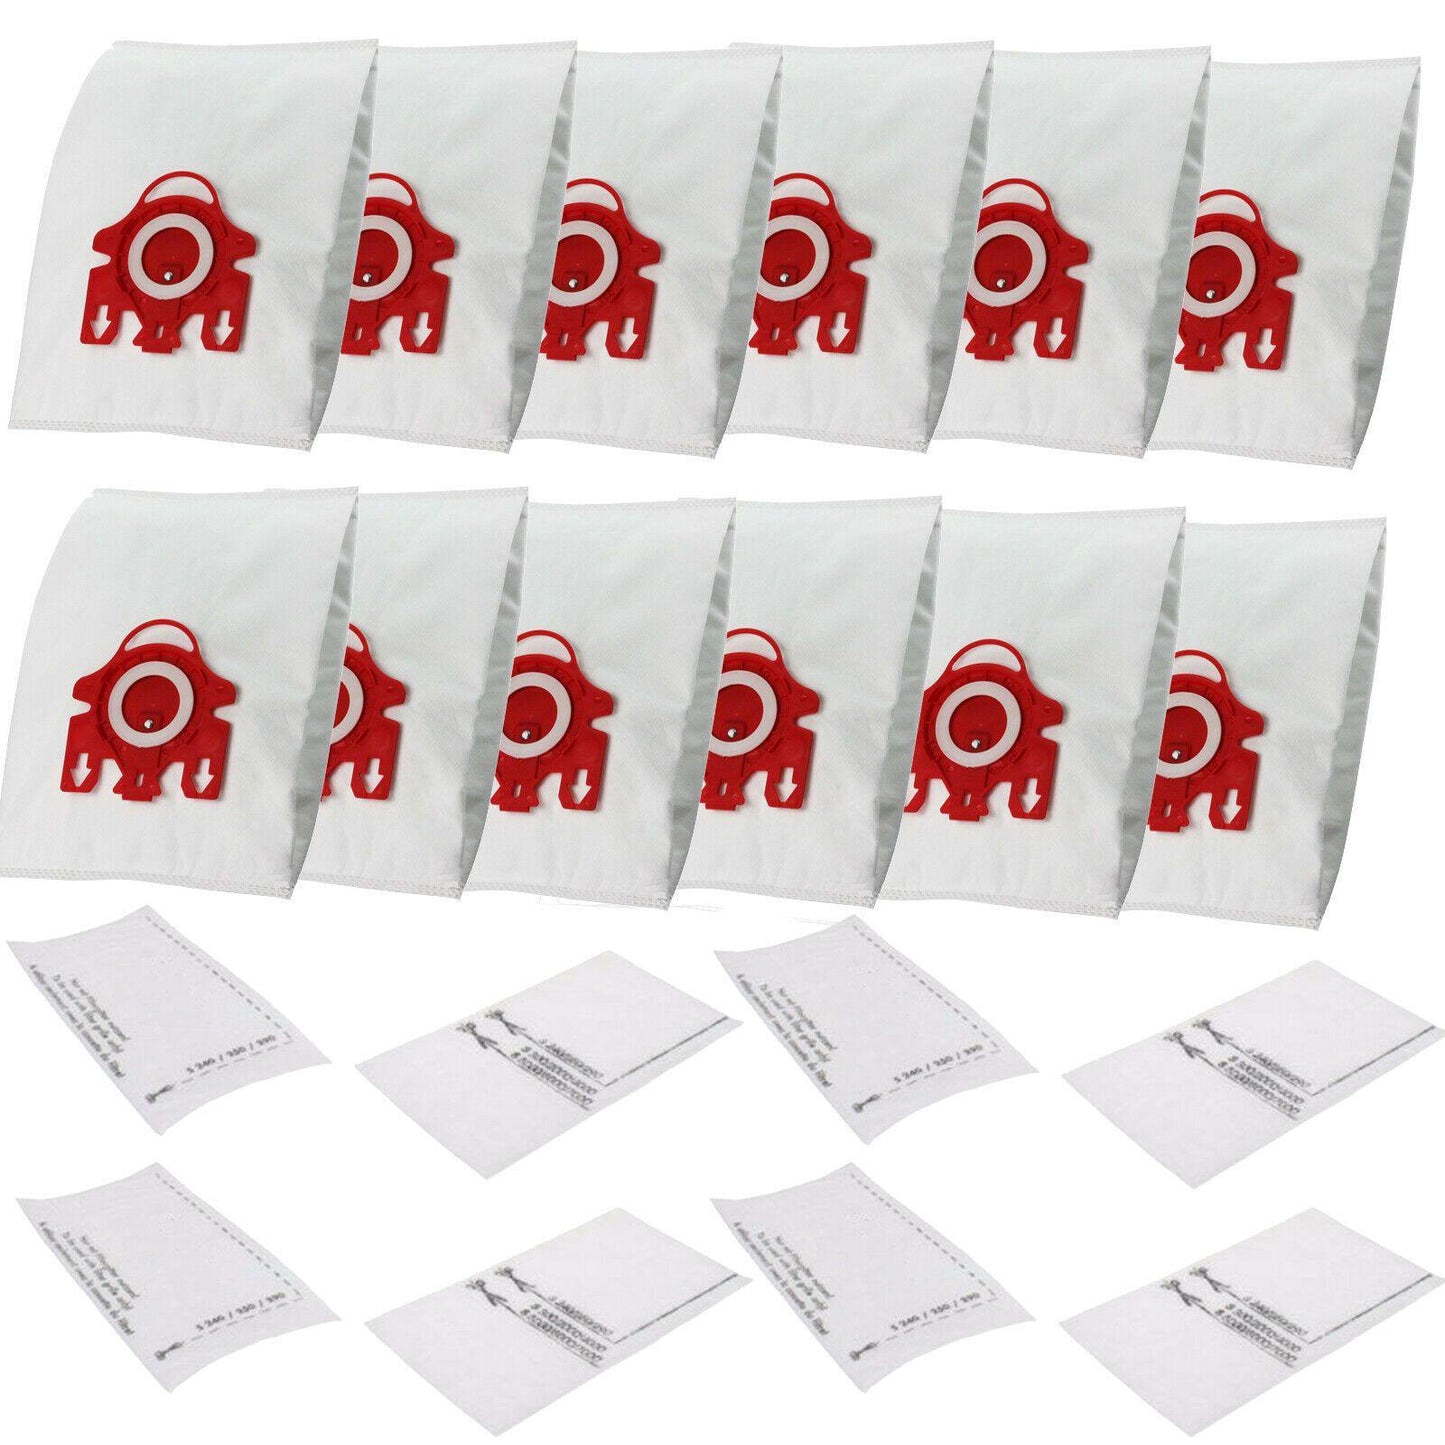 12 Dust Bags & 8 Filters For Miele Selec Line Vacuum Cleaner VC9009 YL101 CH717 Sparesbarn